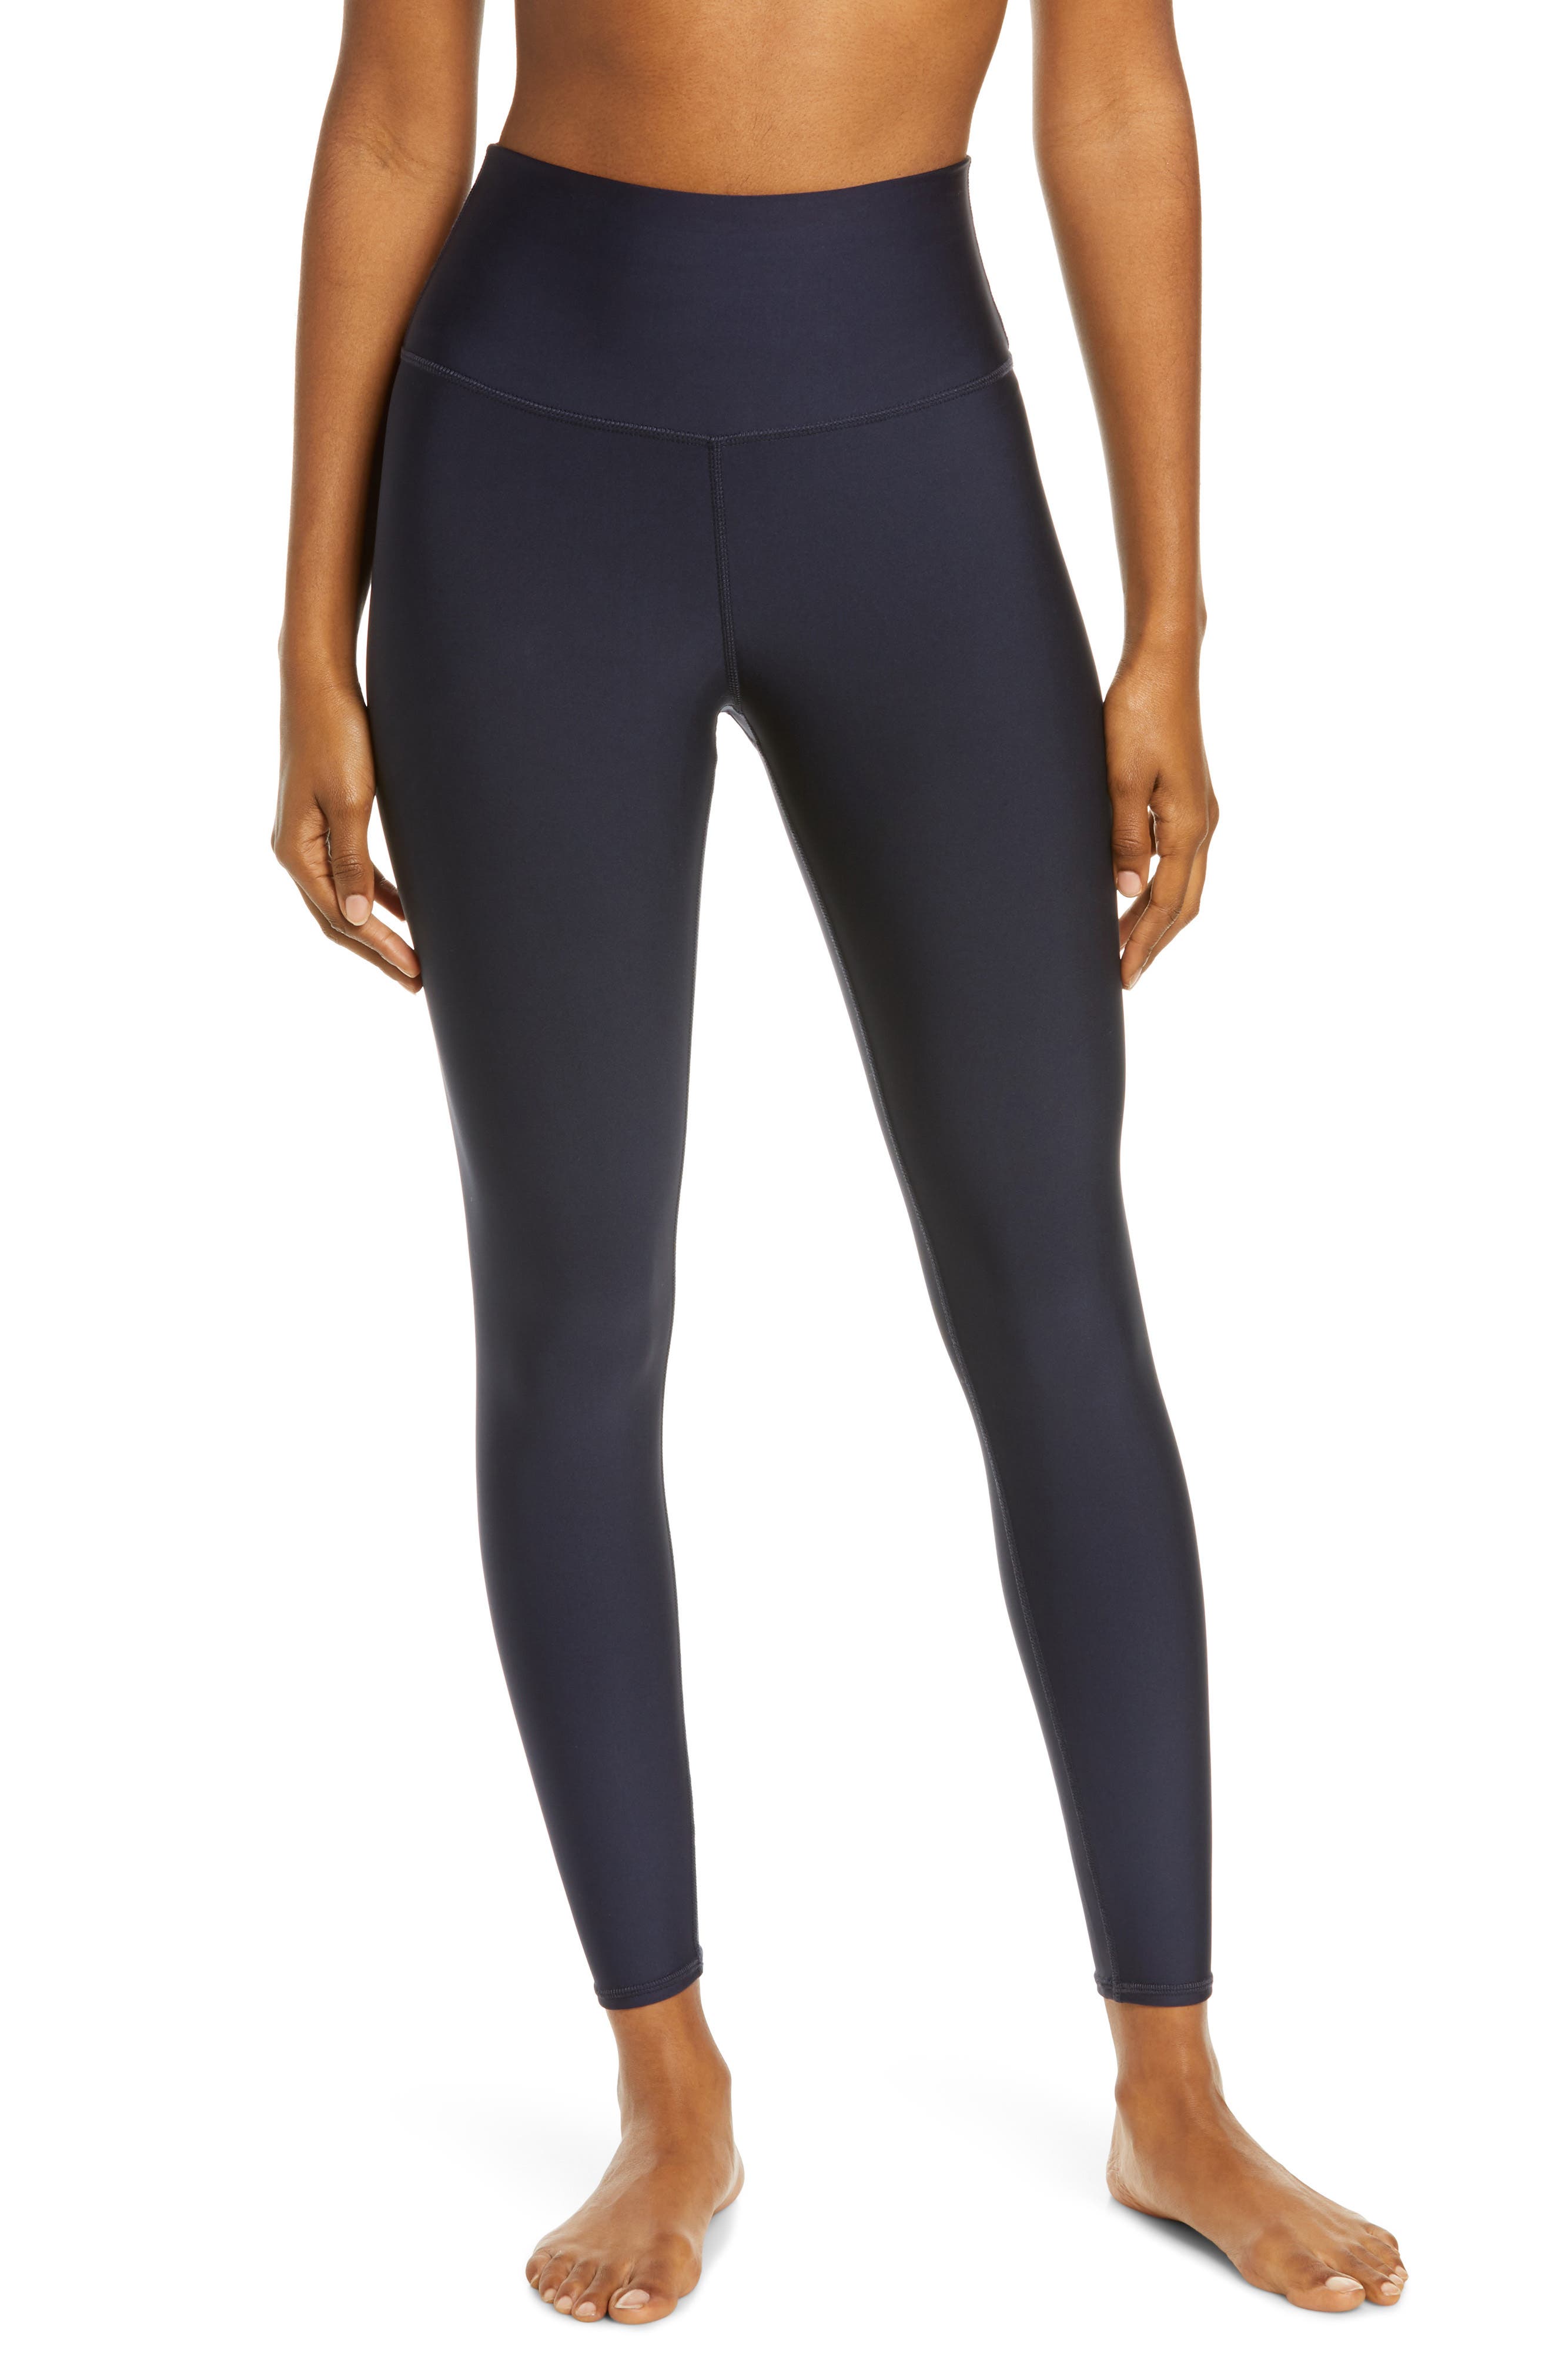 High-Waist Airlift Legging in Lavender Dusk by Alo Yoga - Work Well Daily